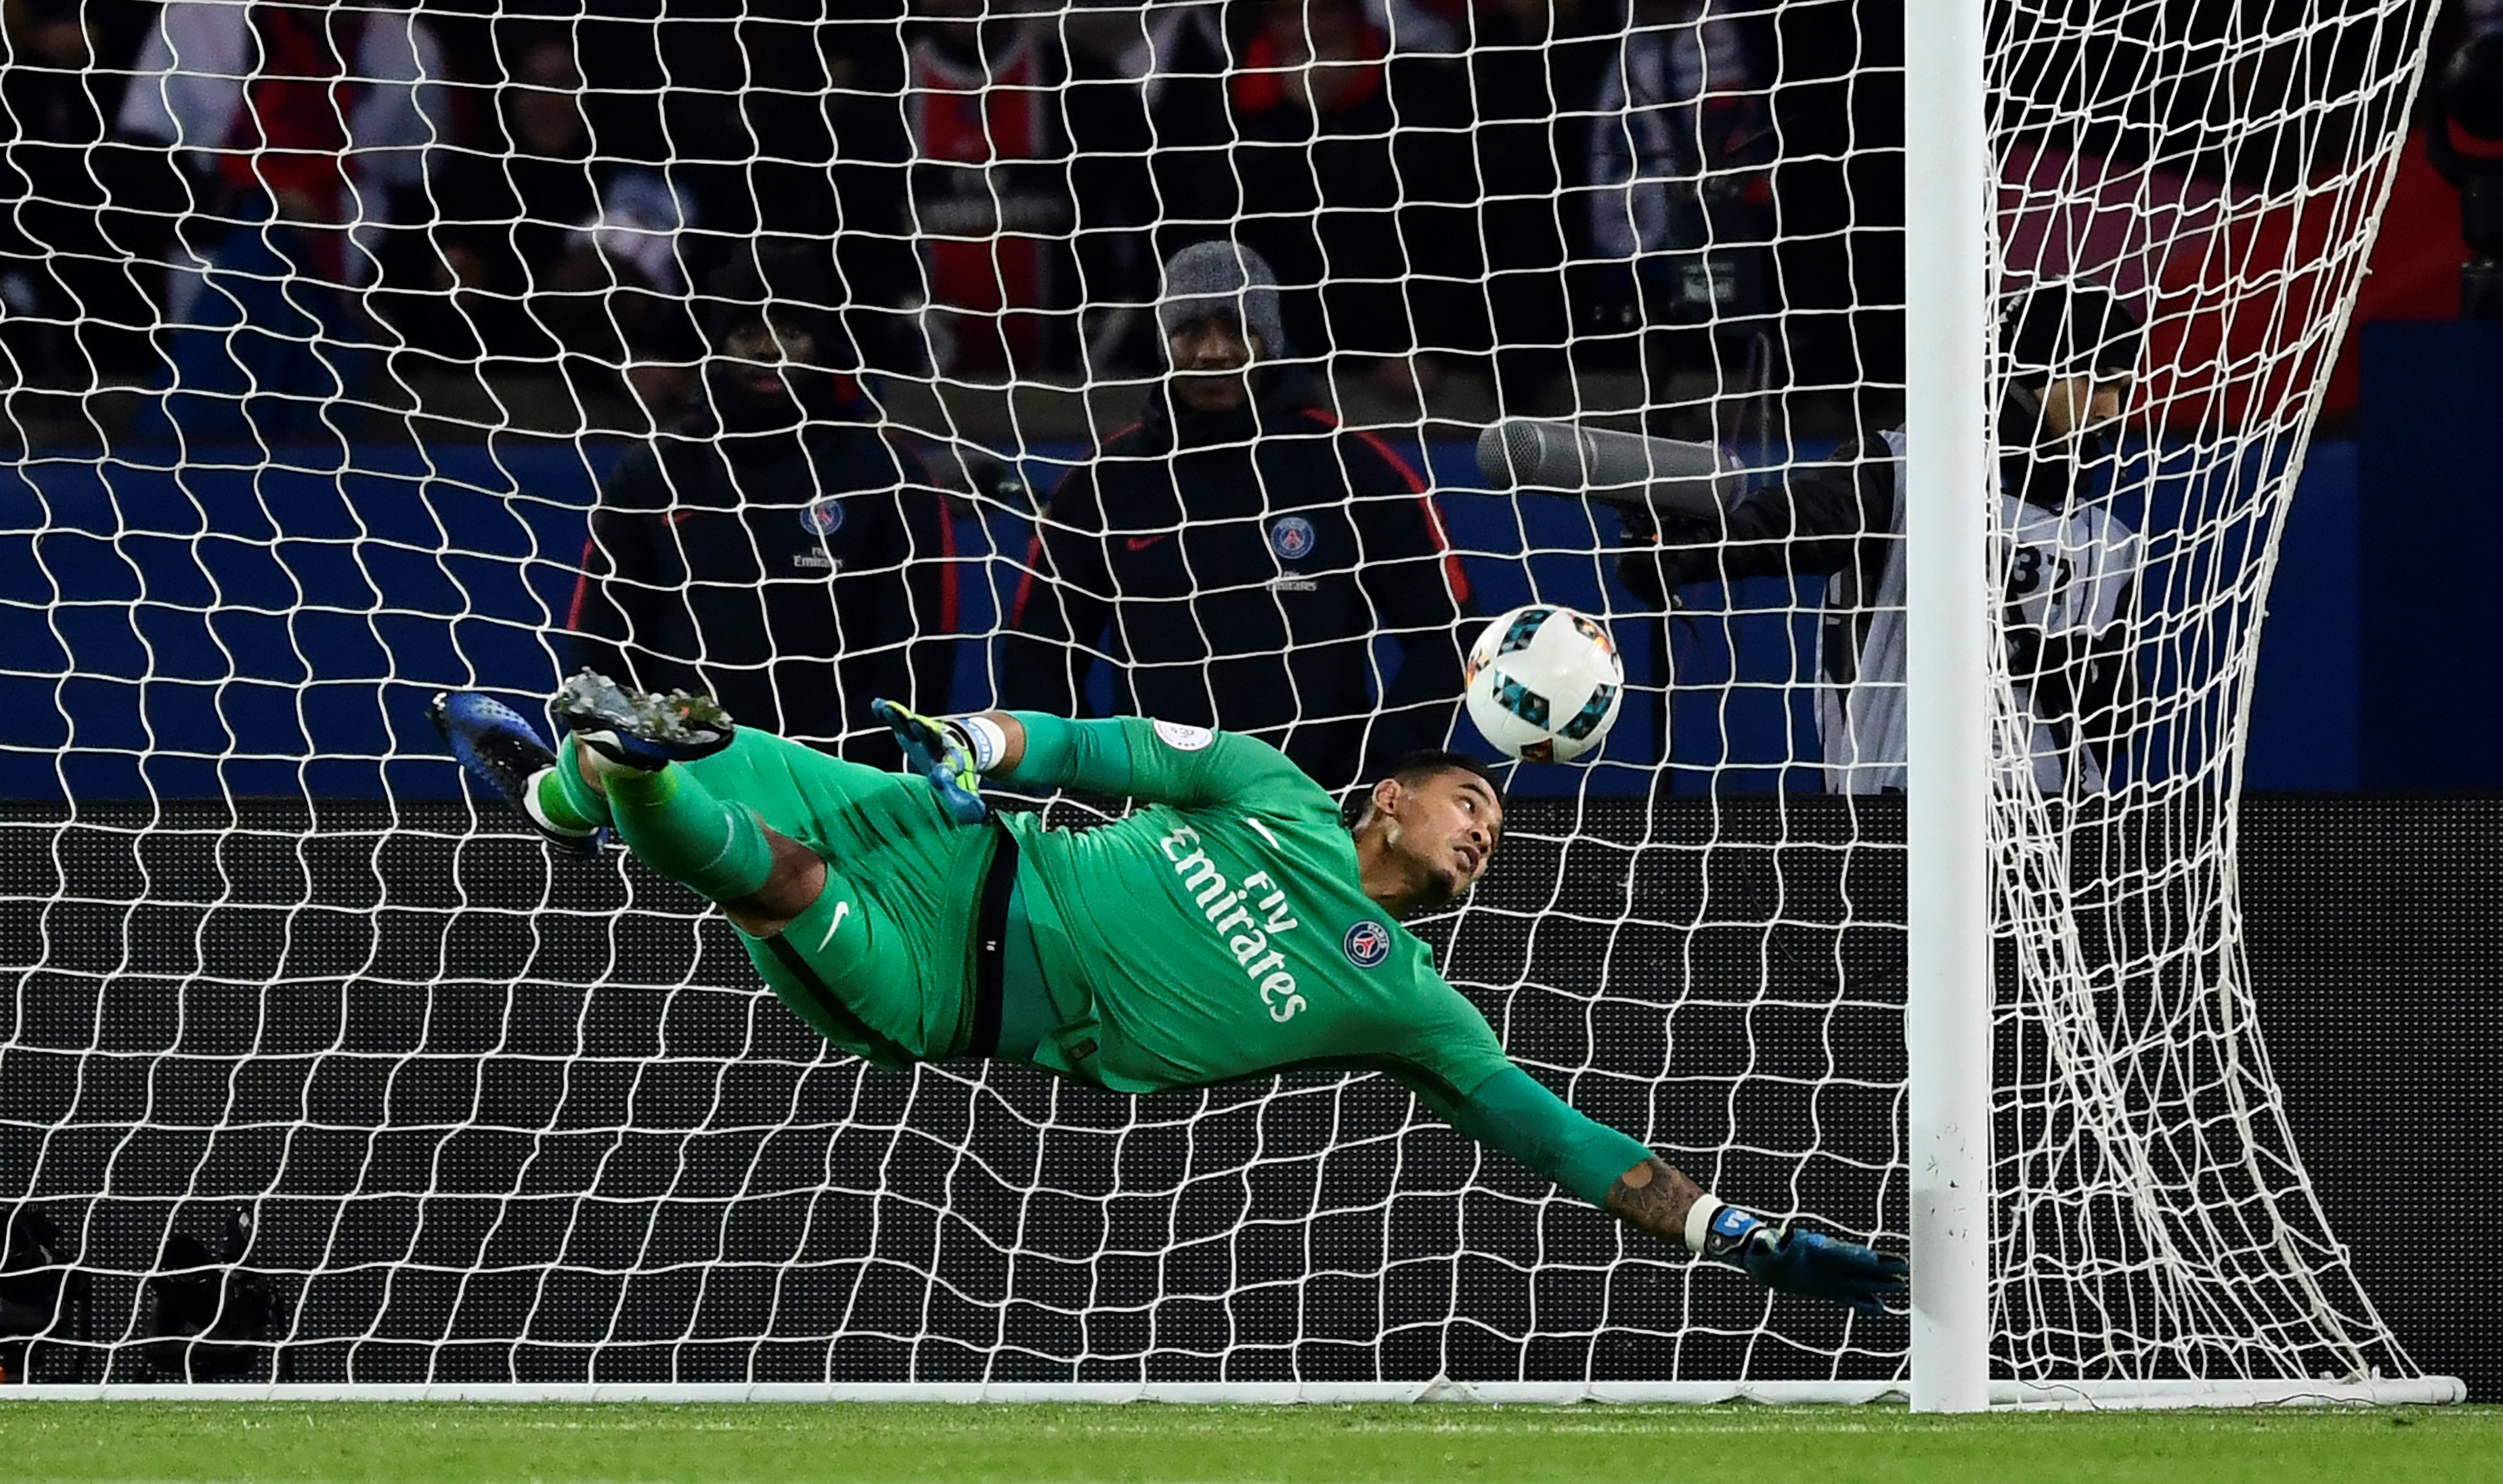 Paris Saint-Germain's French goalkeeper Alphonse Areola concedes a goal during the French L1 football match between Paris Saint-Germain and Nice at the Parc des Princes stadium in Paris on Deecmber 11, 2016.  / AFP / MIGUEL MEDINA        (Photo credit should read MIGUEL MEDINA/AFP/Getty Images)